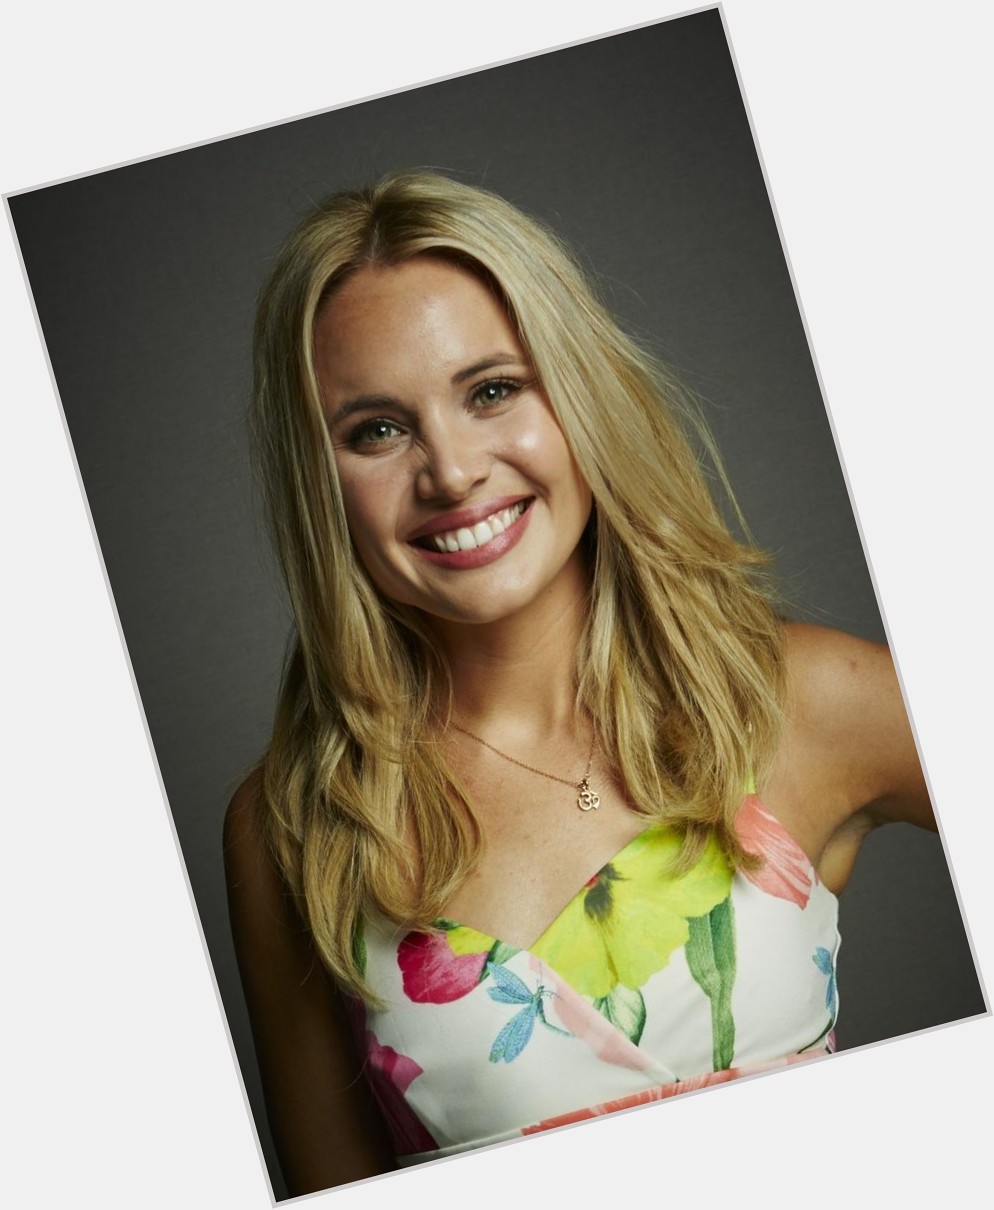 Happy Birthday
Film television actress
Leah Pipes  